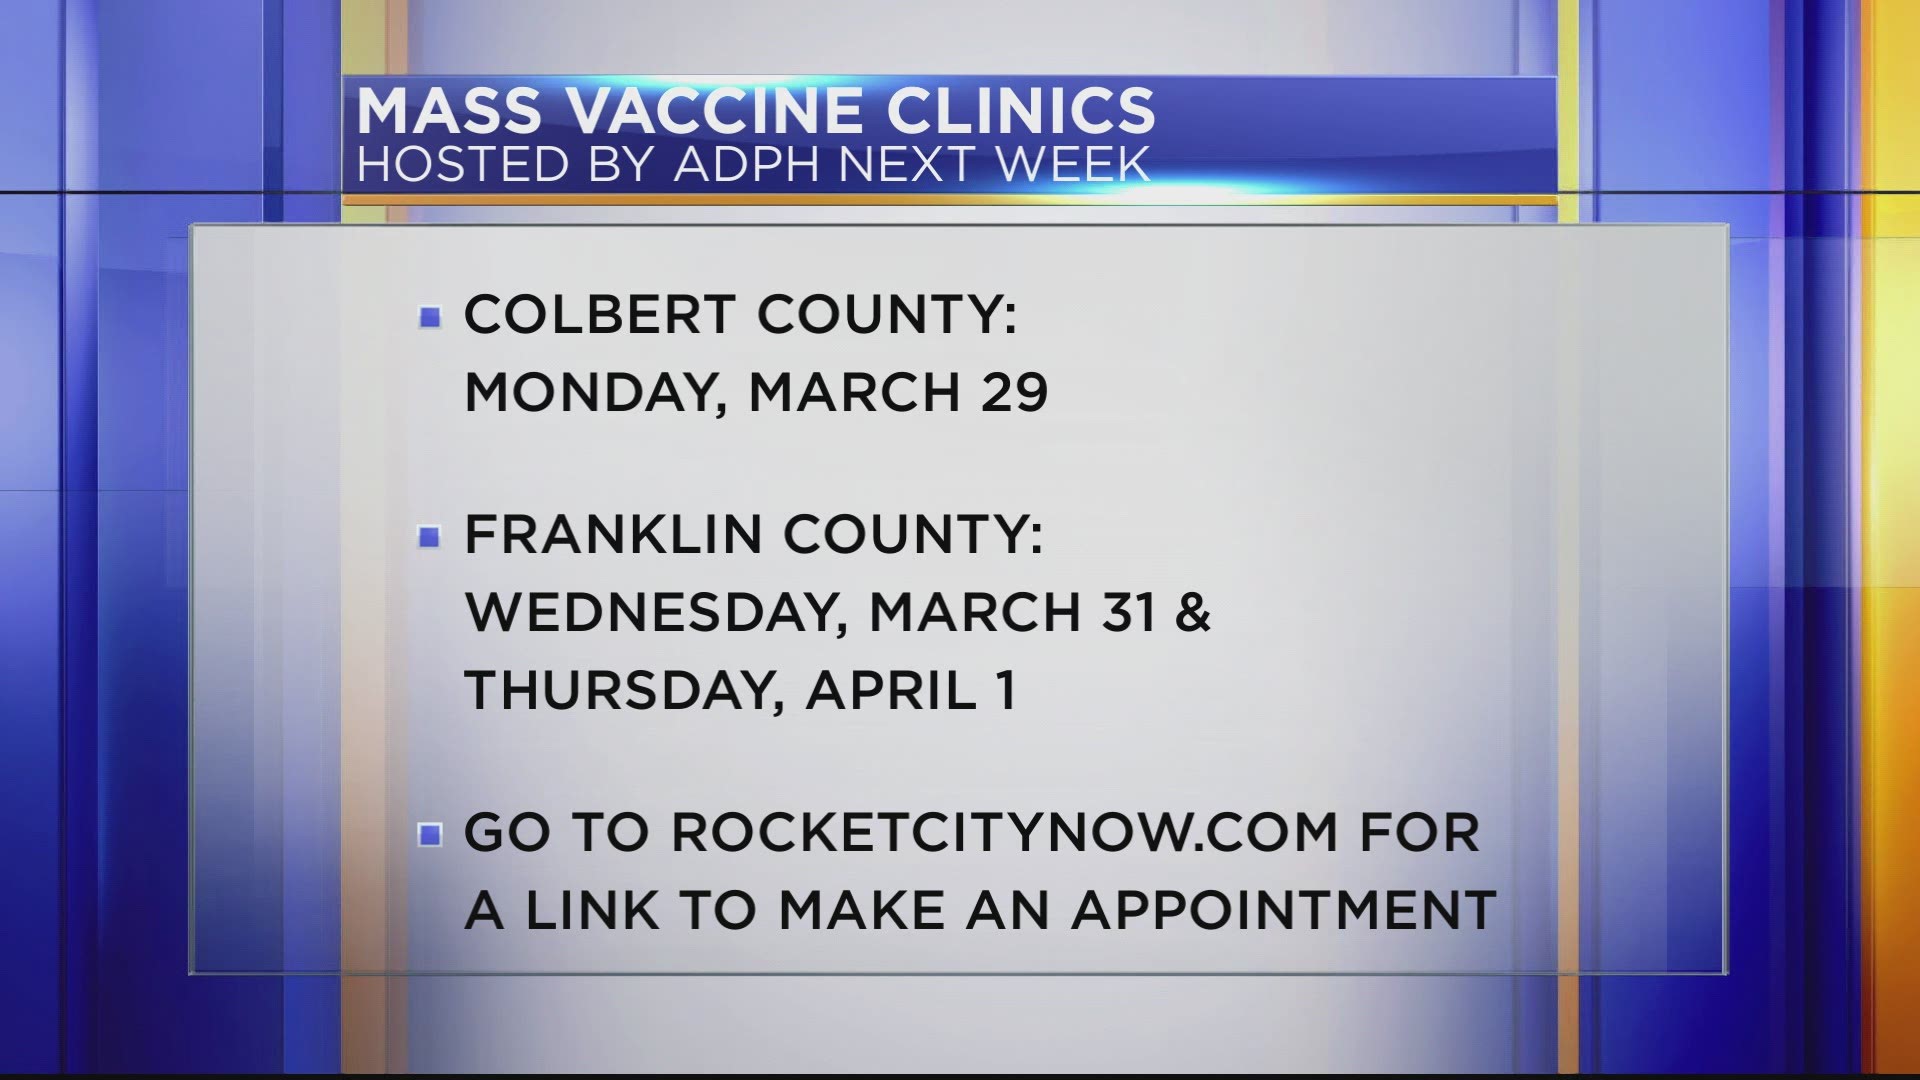 Beginning March 27, the Alabama Department of Public Health (ADPH) will hold drive-through COVID-19 vaccination clinics in Colbert, Franklin, and other counties.